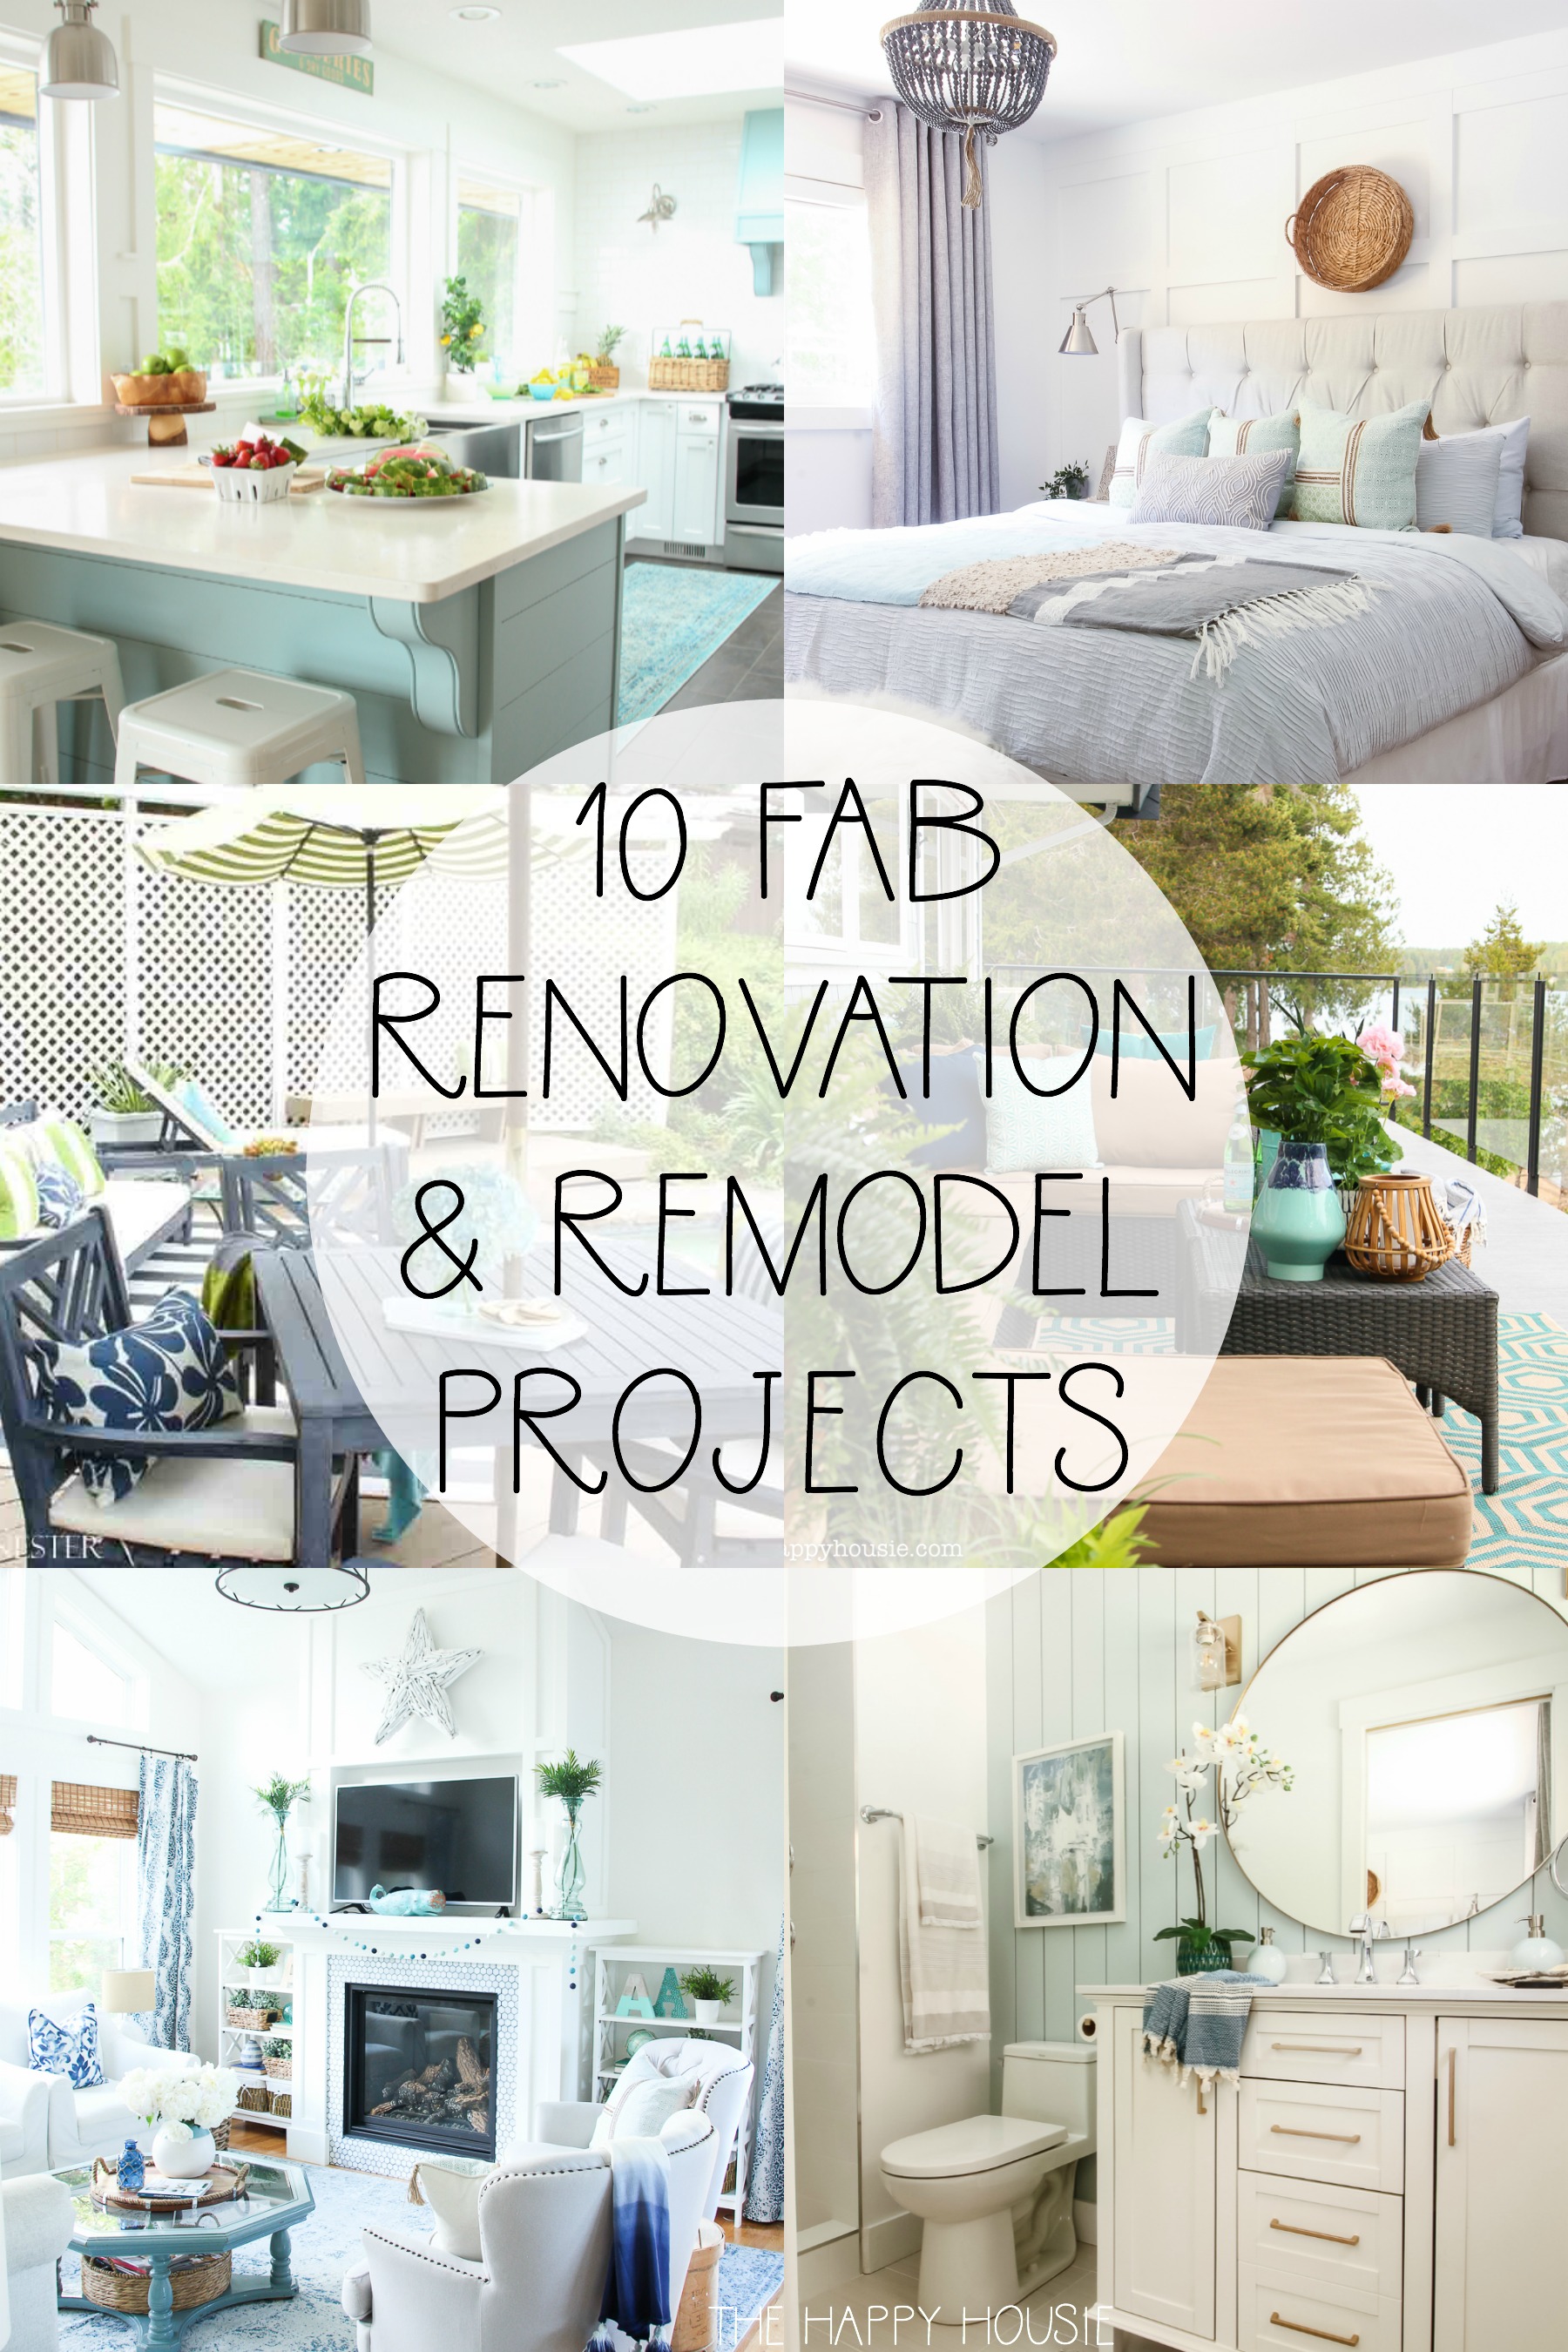 10 Fab Renovation & Remodel Projects poster.